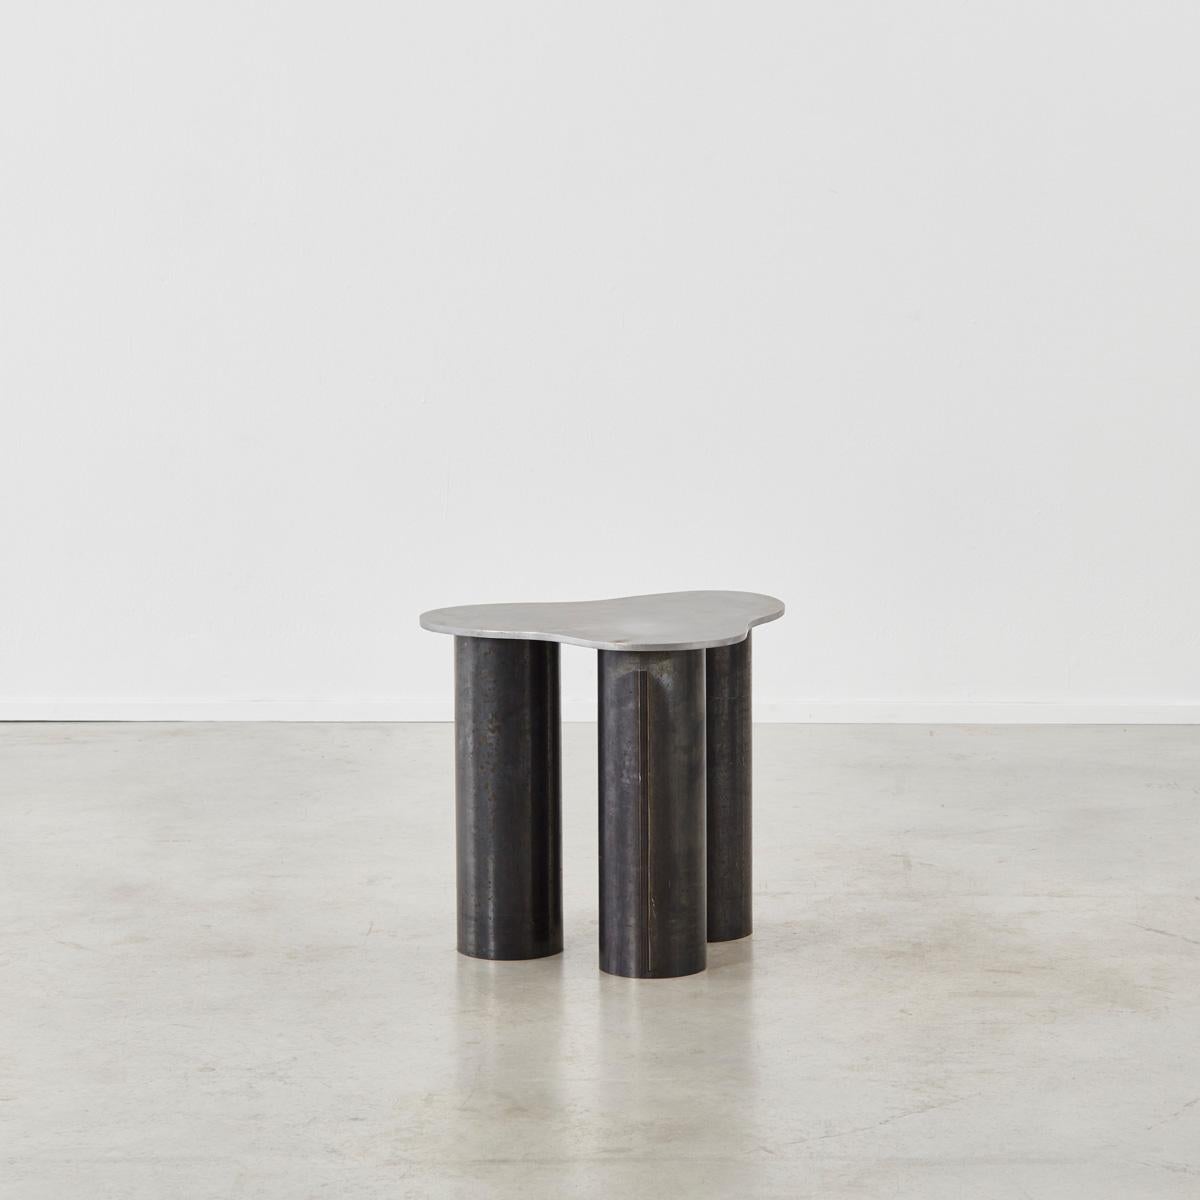 Side table 001 is a made to order design by Archive for Space, a multidisciplinary design practice founded in London in 2019. Side table 001 was designed to celebrate raw steel through exploring the material’s cyclical nature. Made from standard